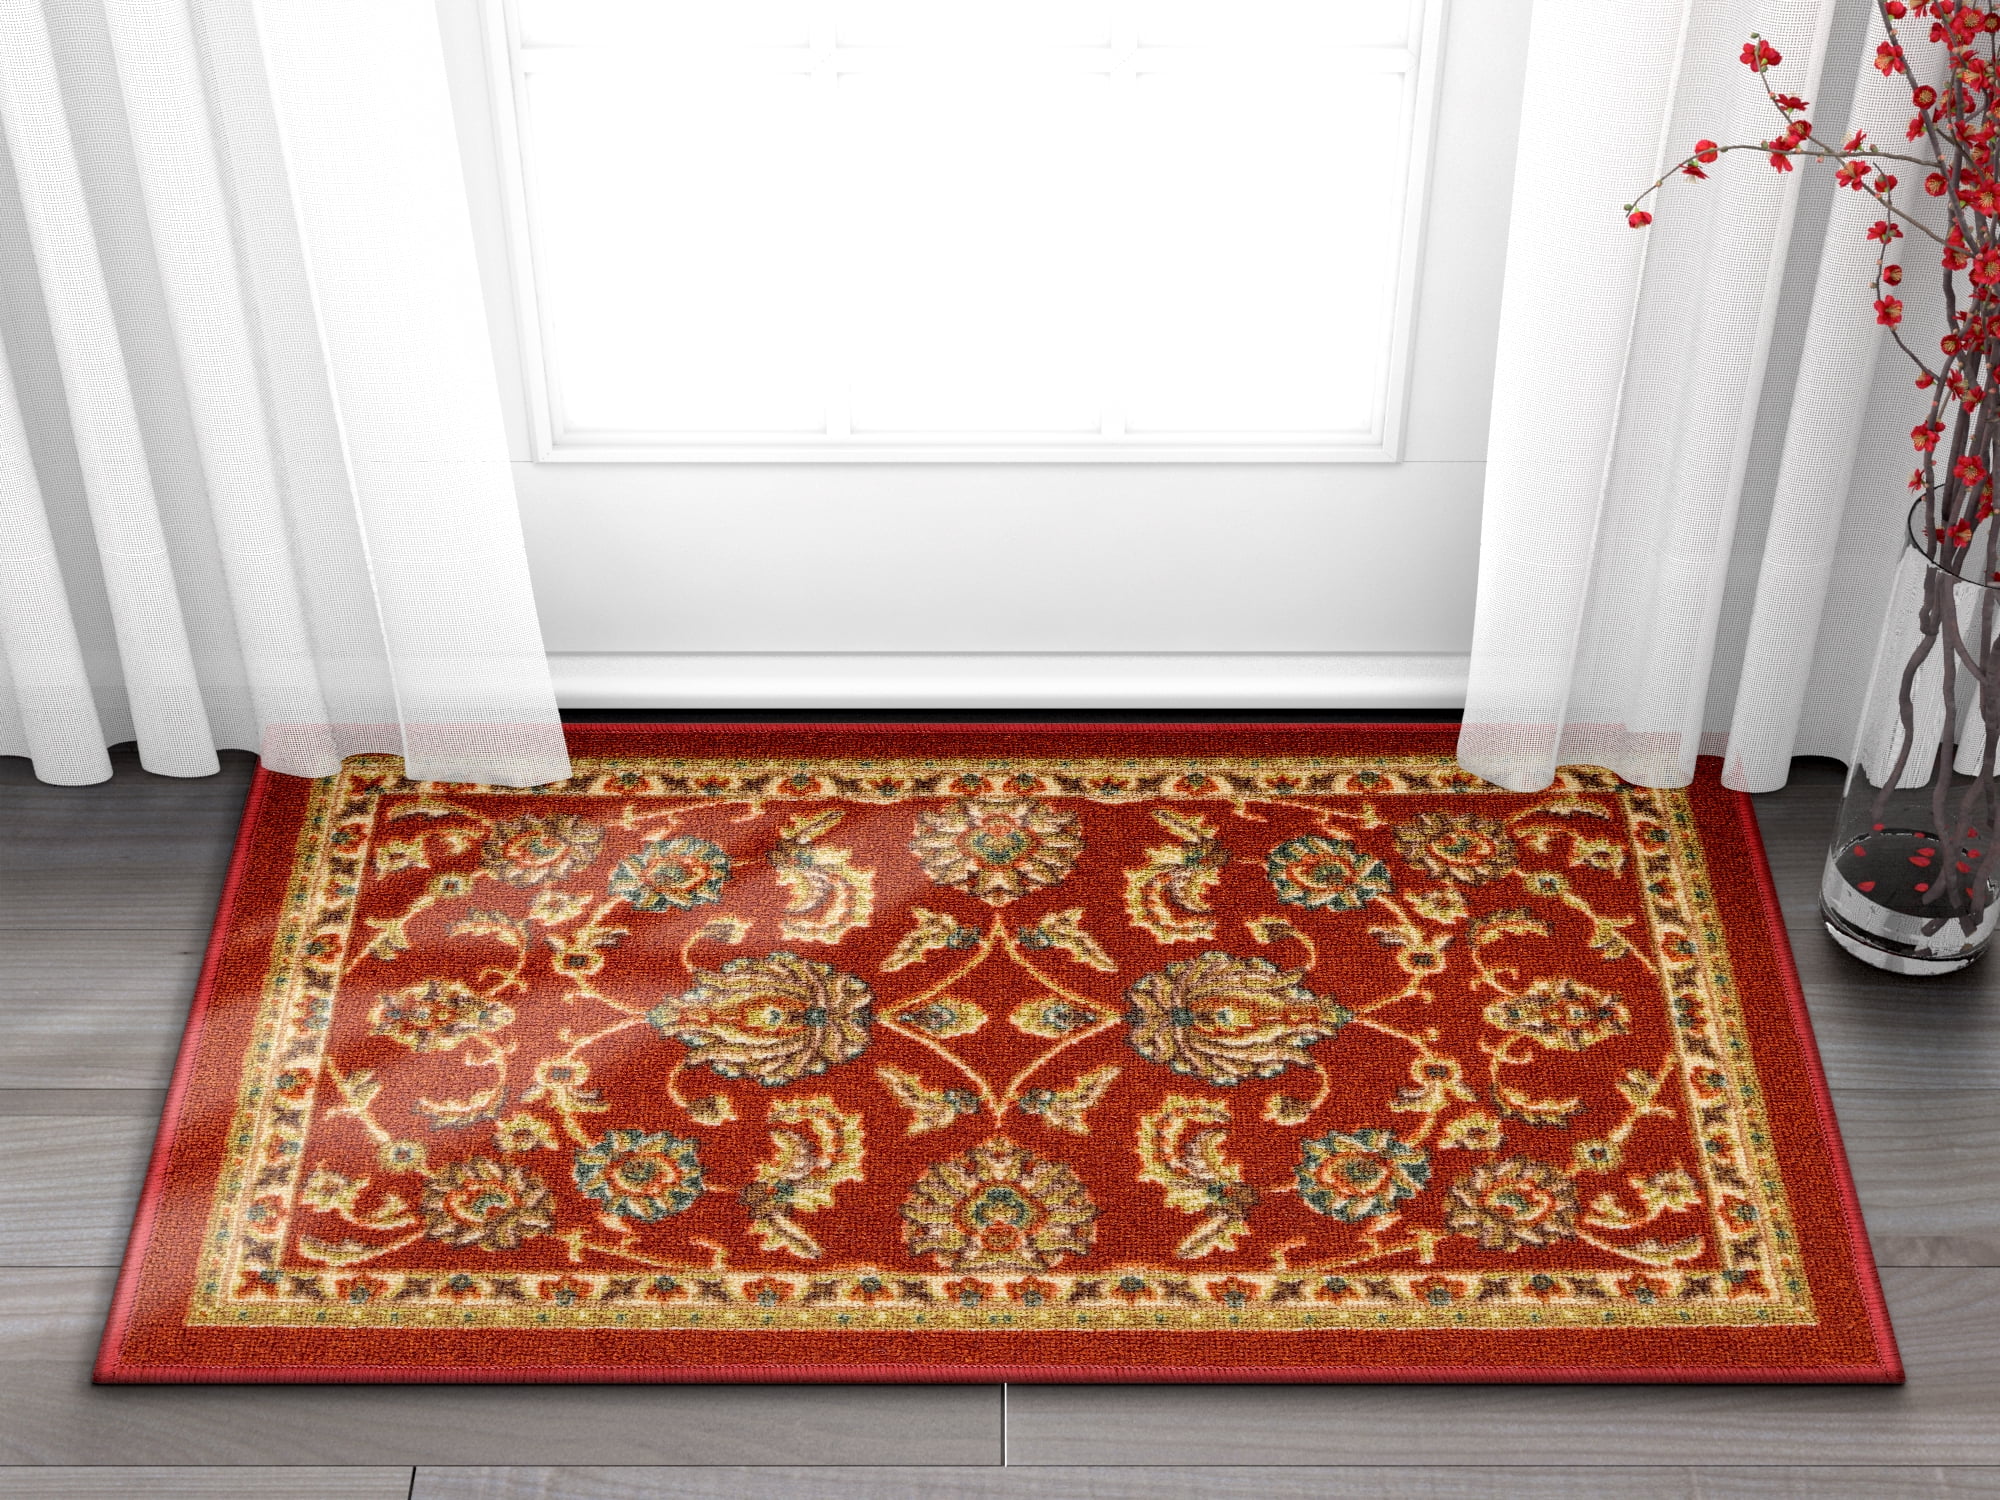 Antep Rugs Alfombras Oriental Traditional 5x7 Non-Skid Low Profile Pile Rubber Backing Indoor Area Rugs Non-Slip Maroon, 5' x 7' 